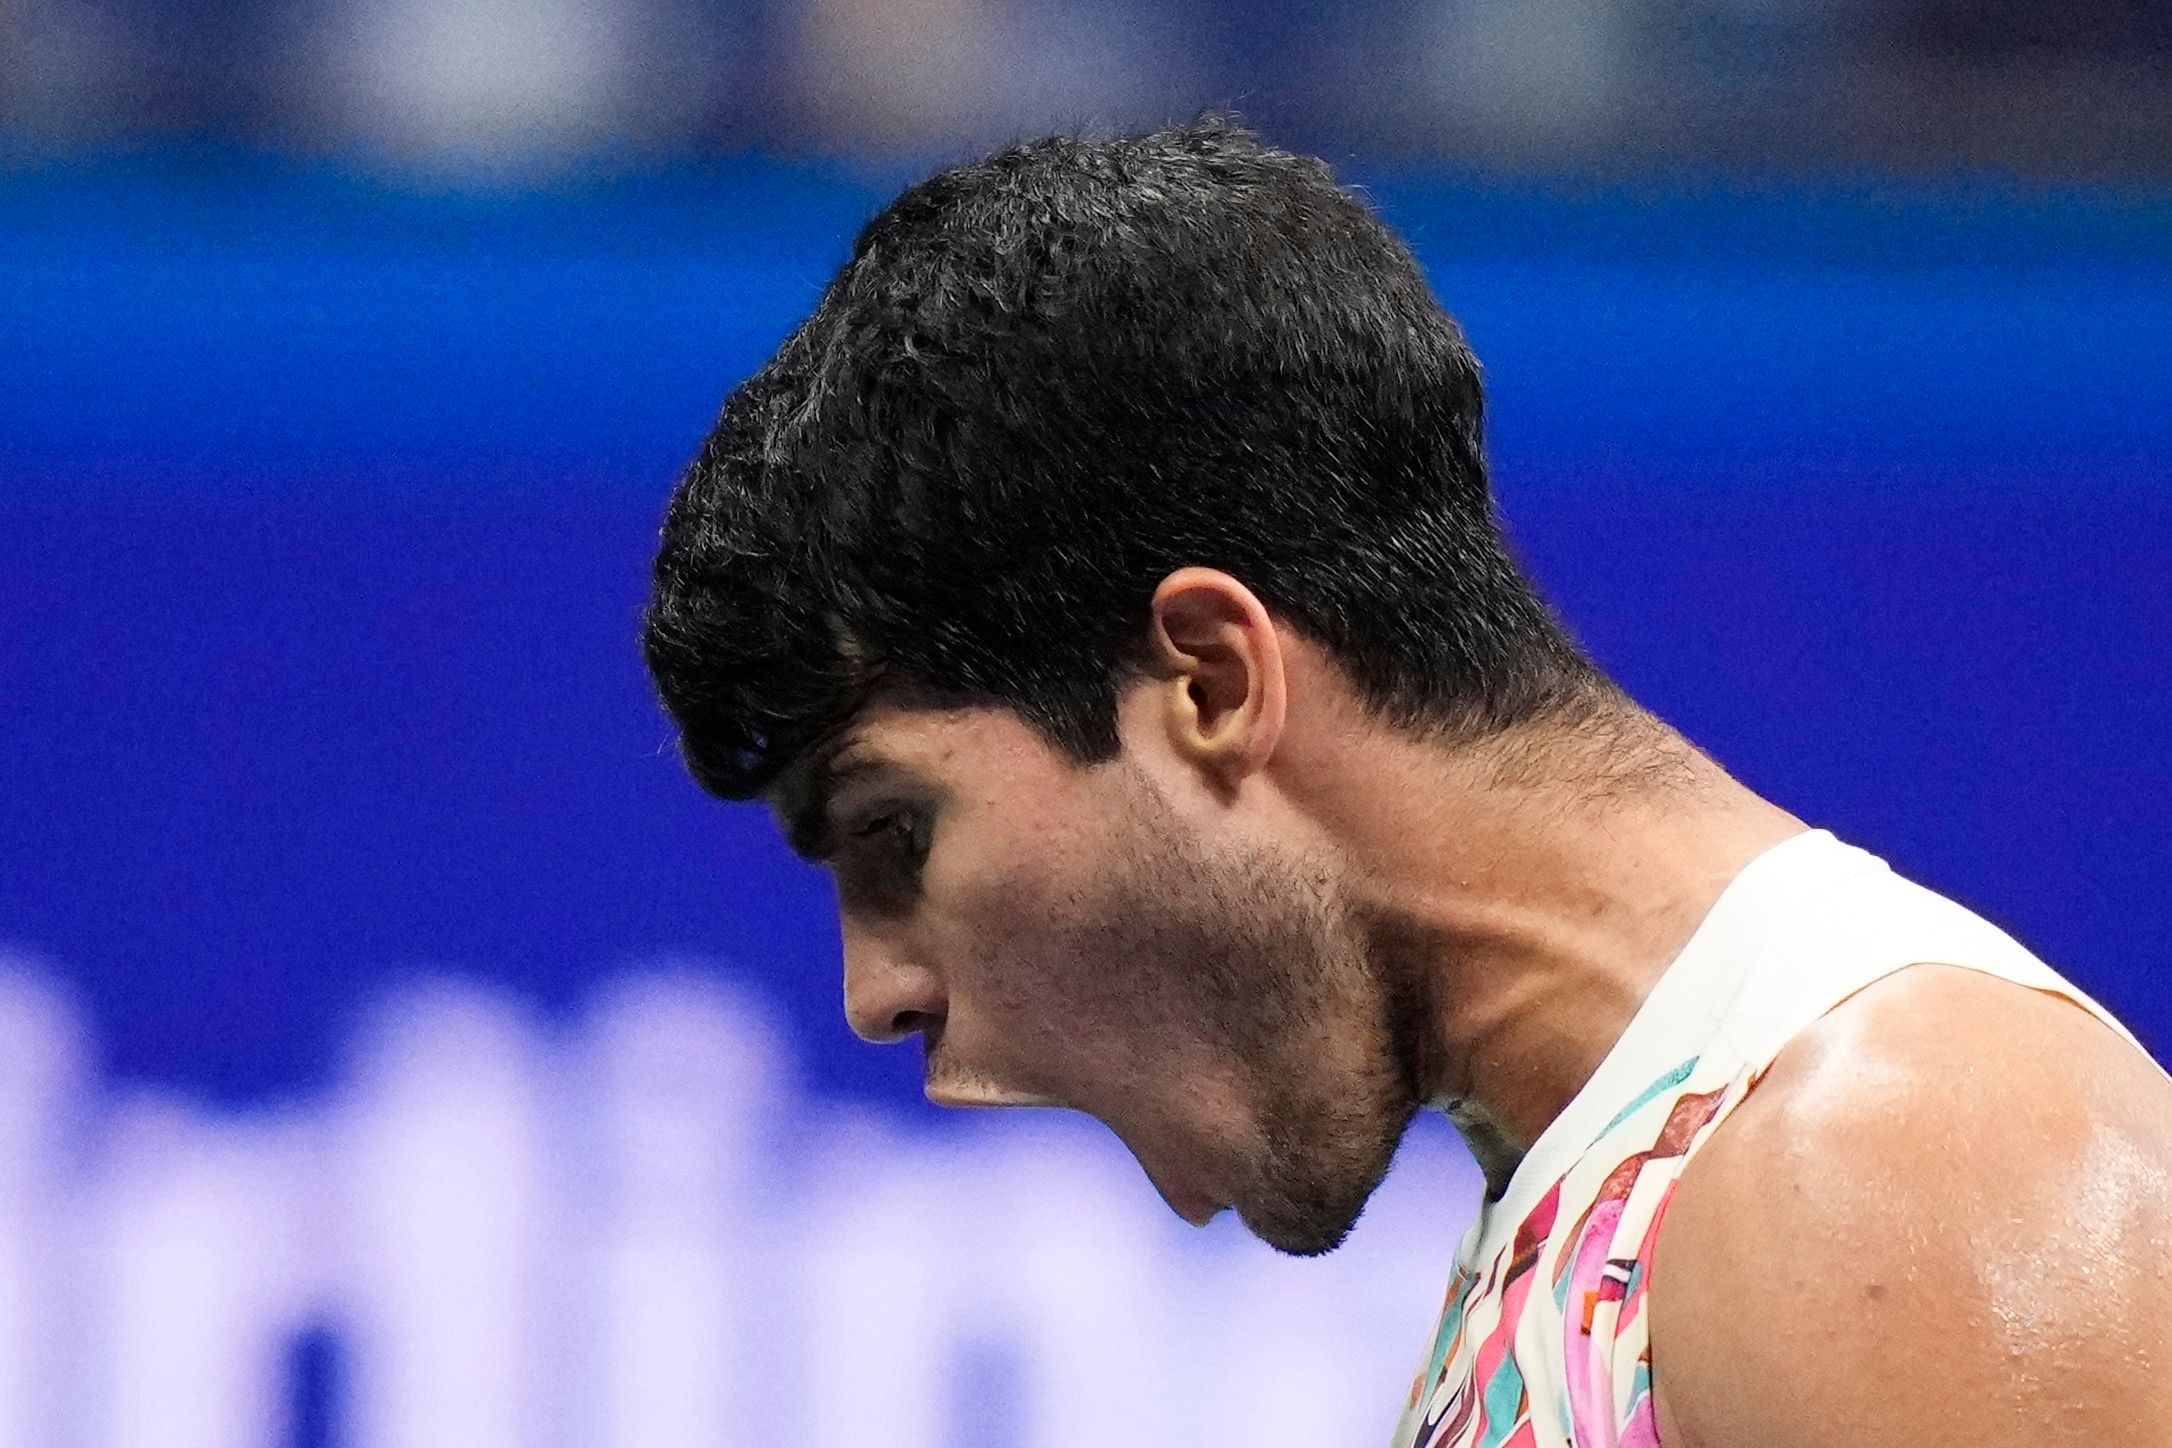 Carlos Alcaraz reaches the US Open semifinals and closes in on a second consecutive title The Seattle Times